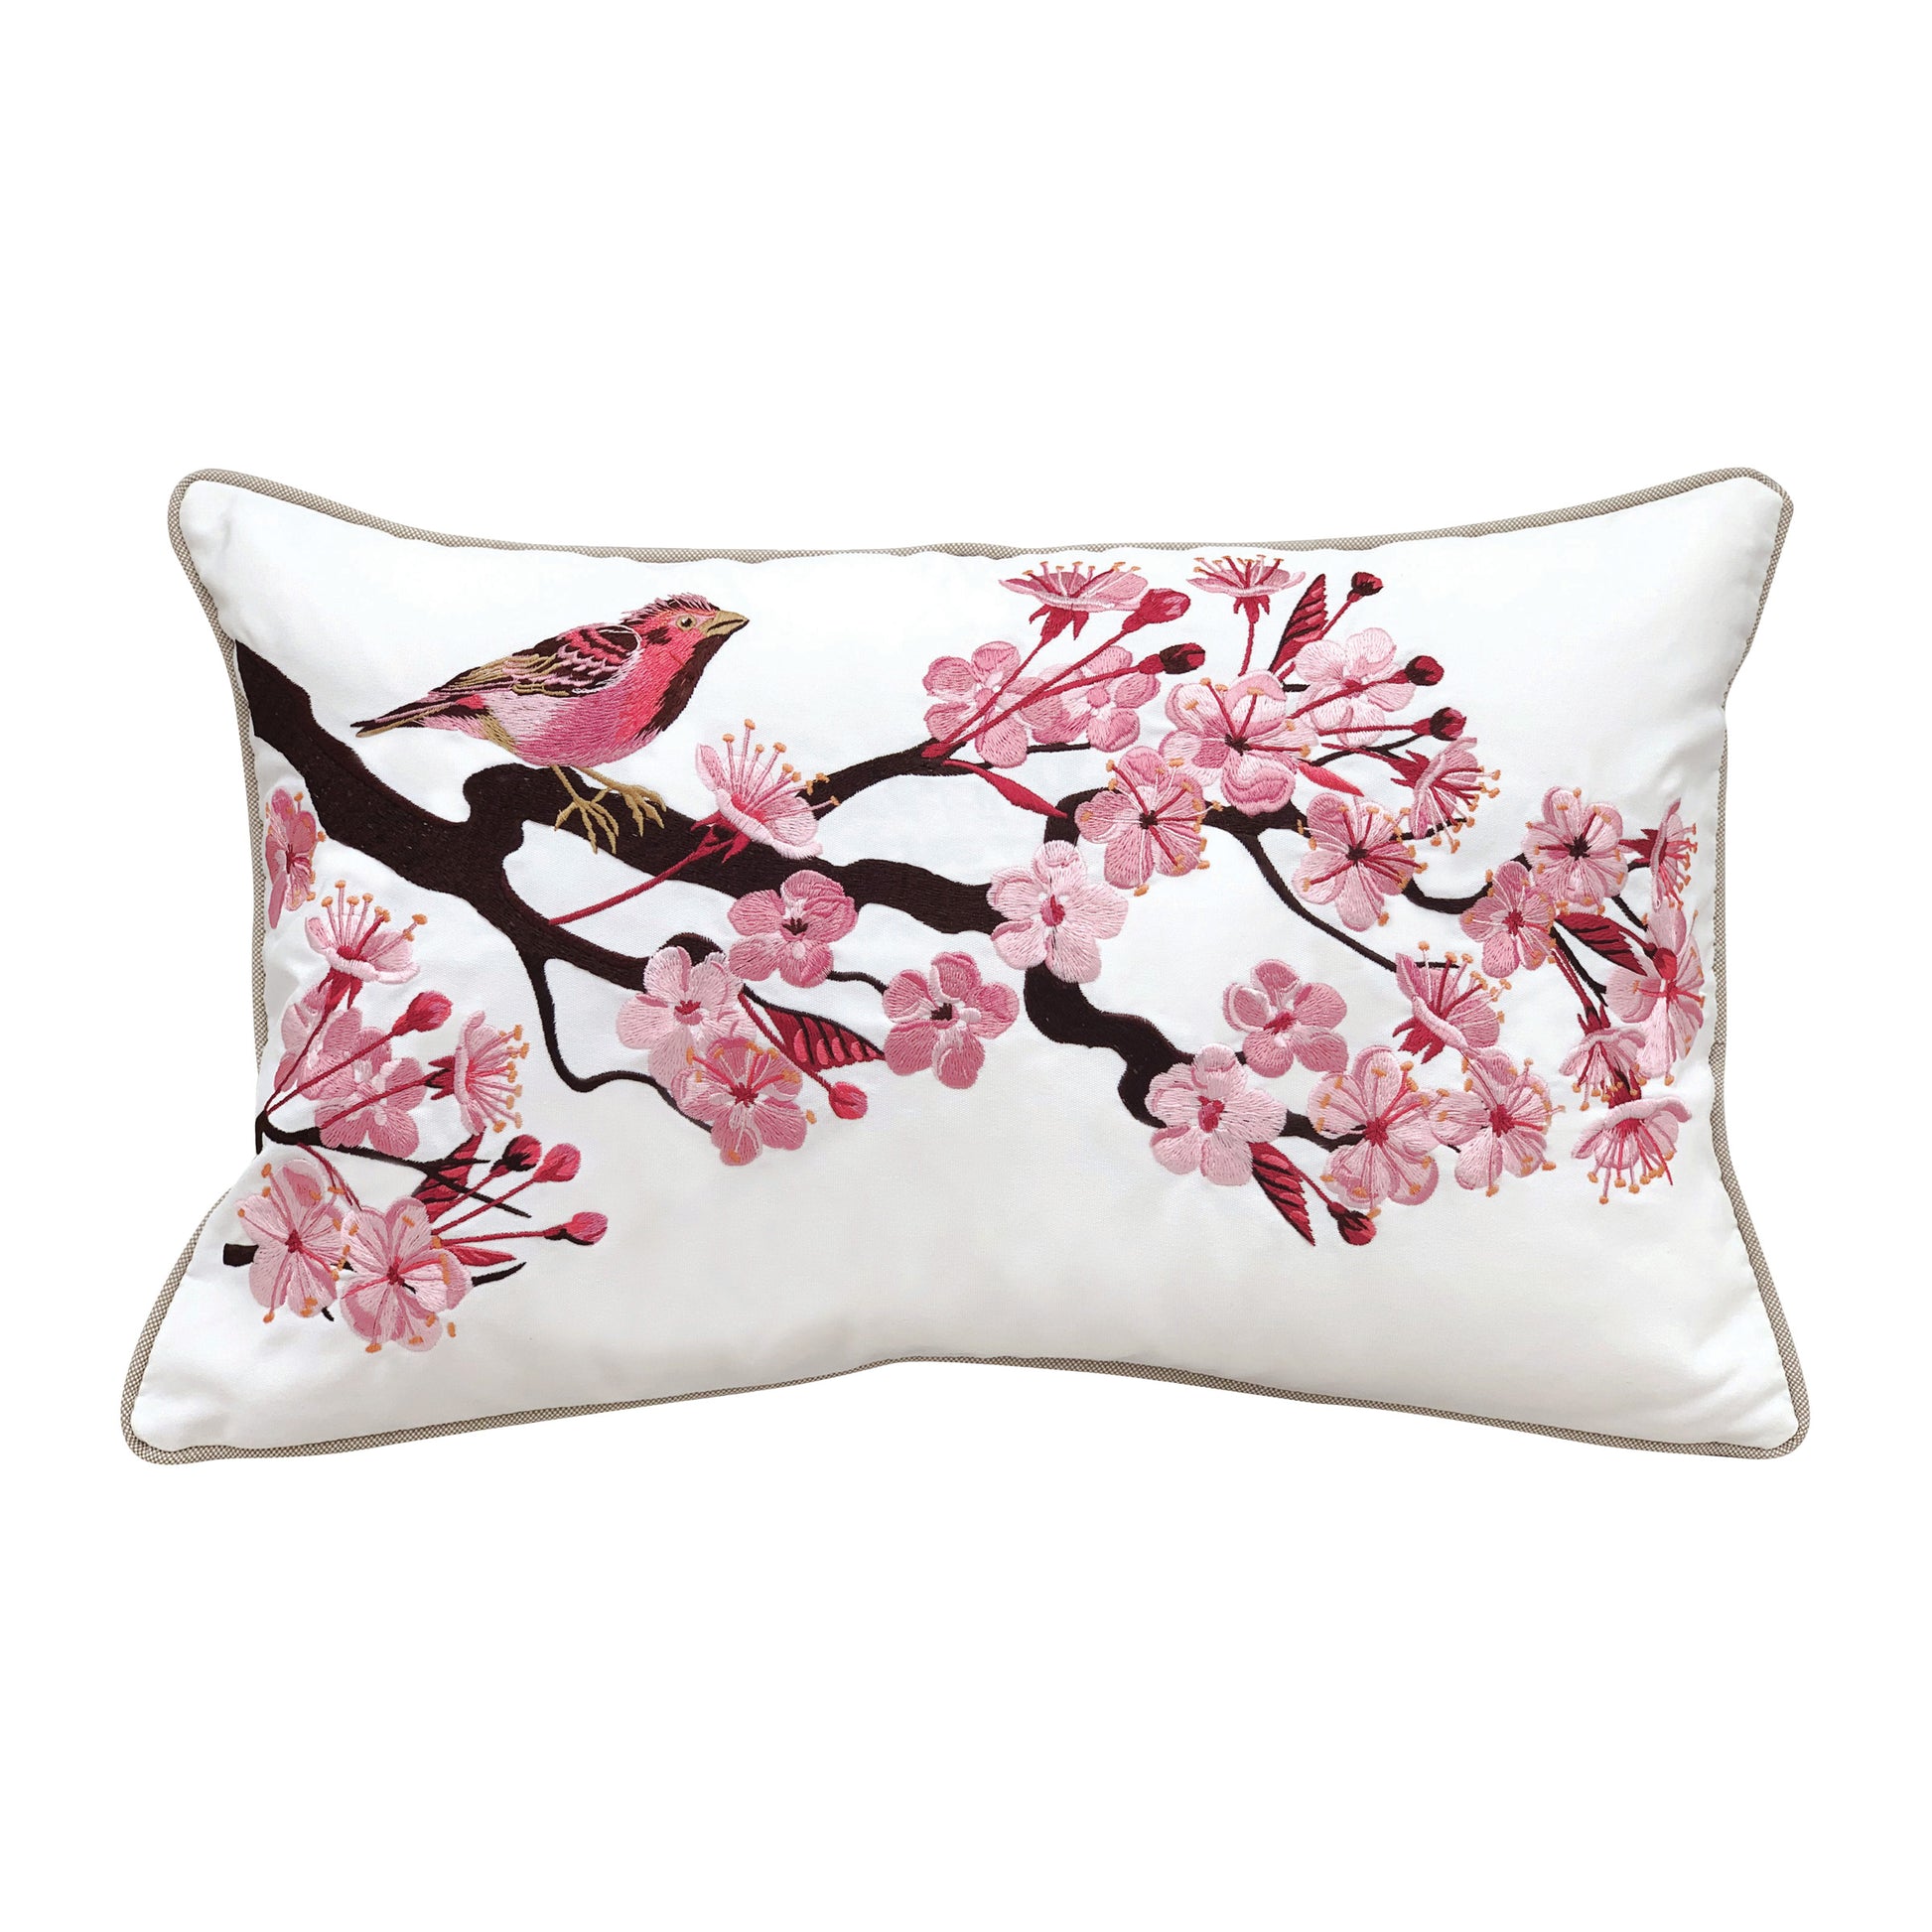 Purple finch sitting on a cherry blossom branch embroidered on a white background. Pillow finished with grey piped edging.